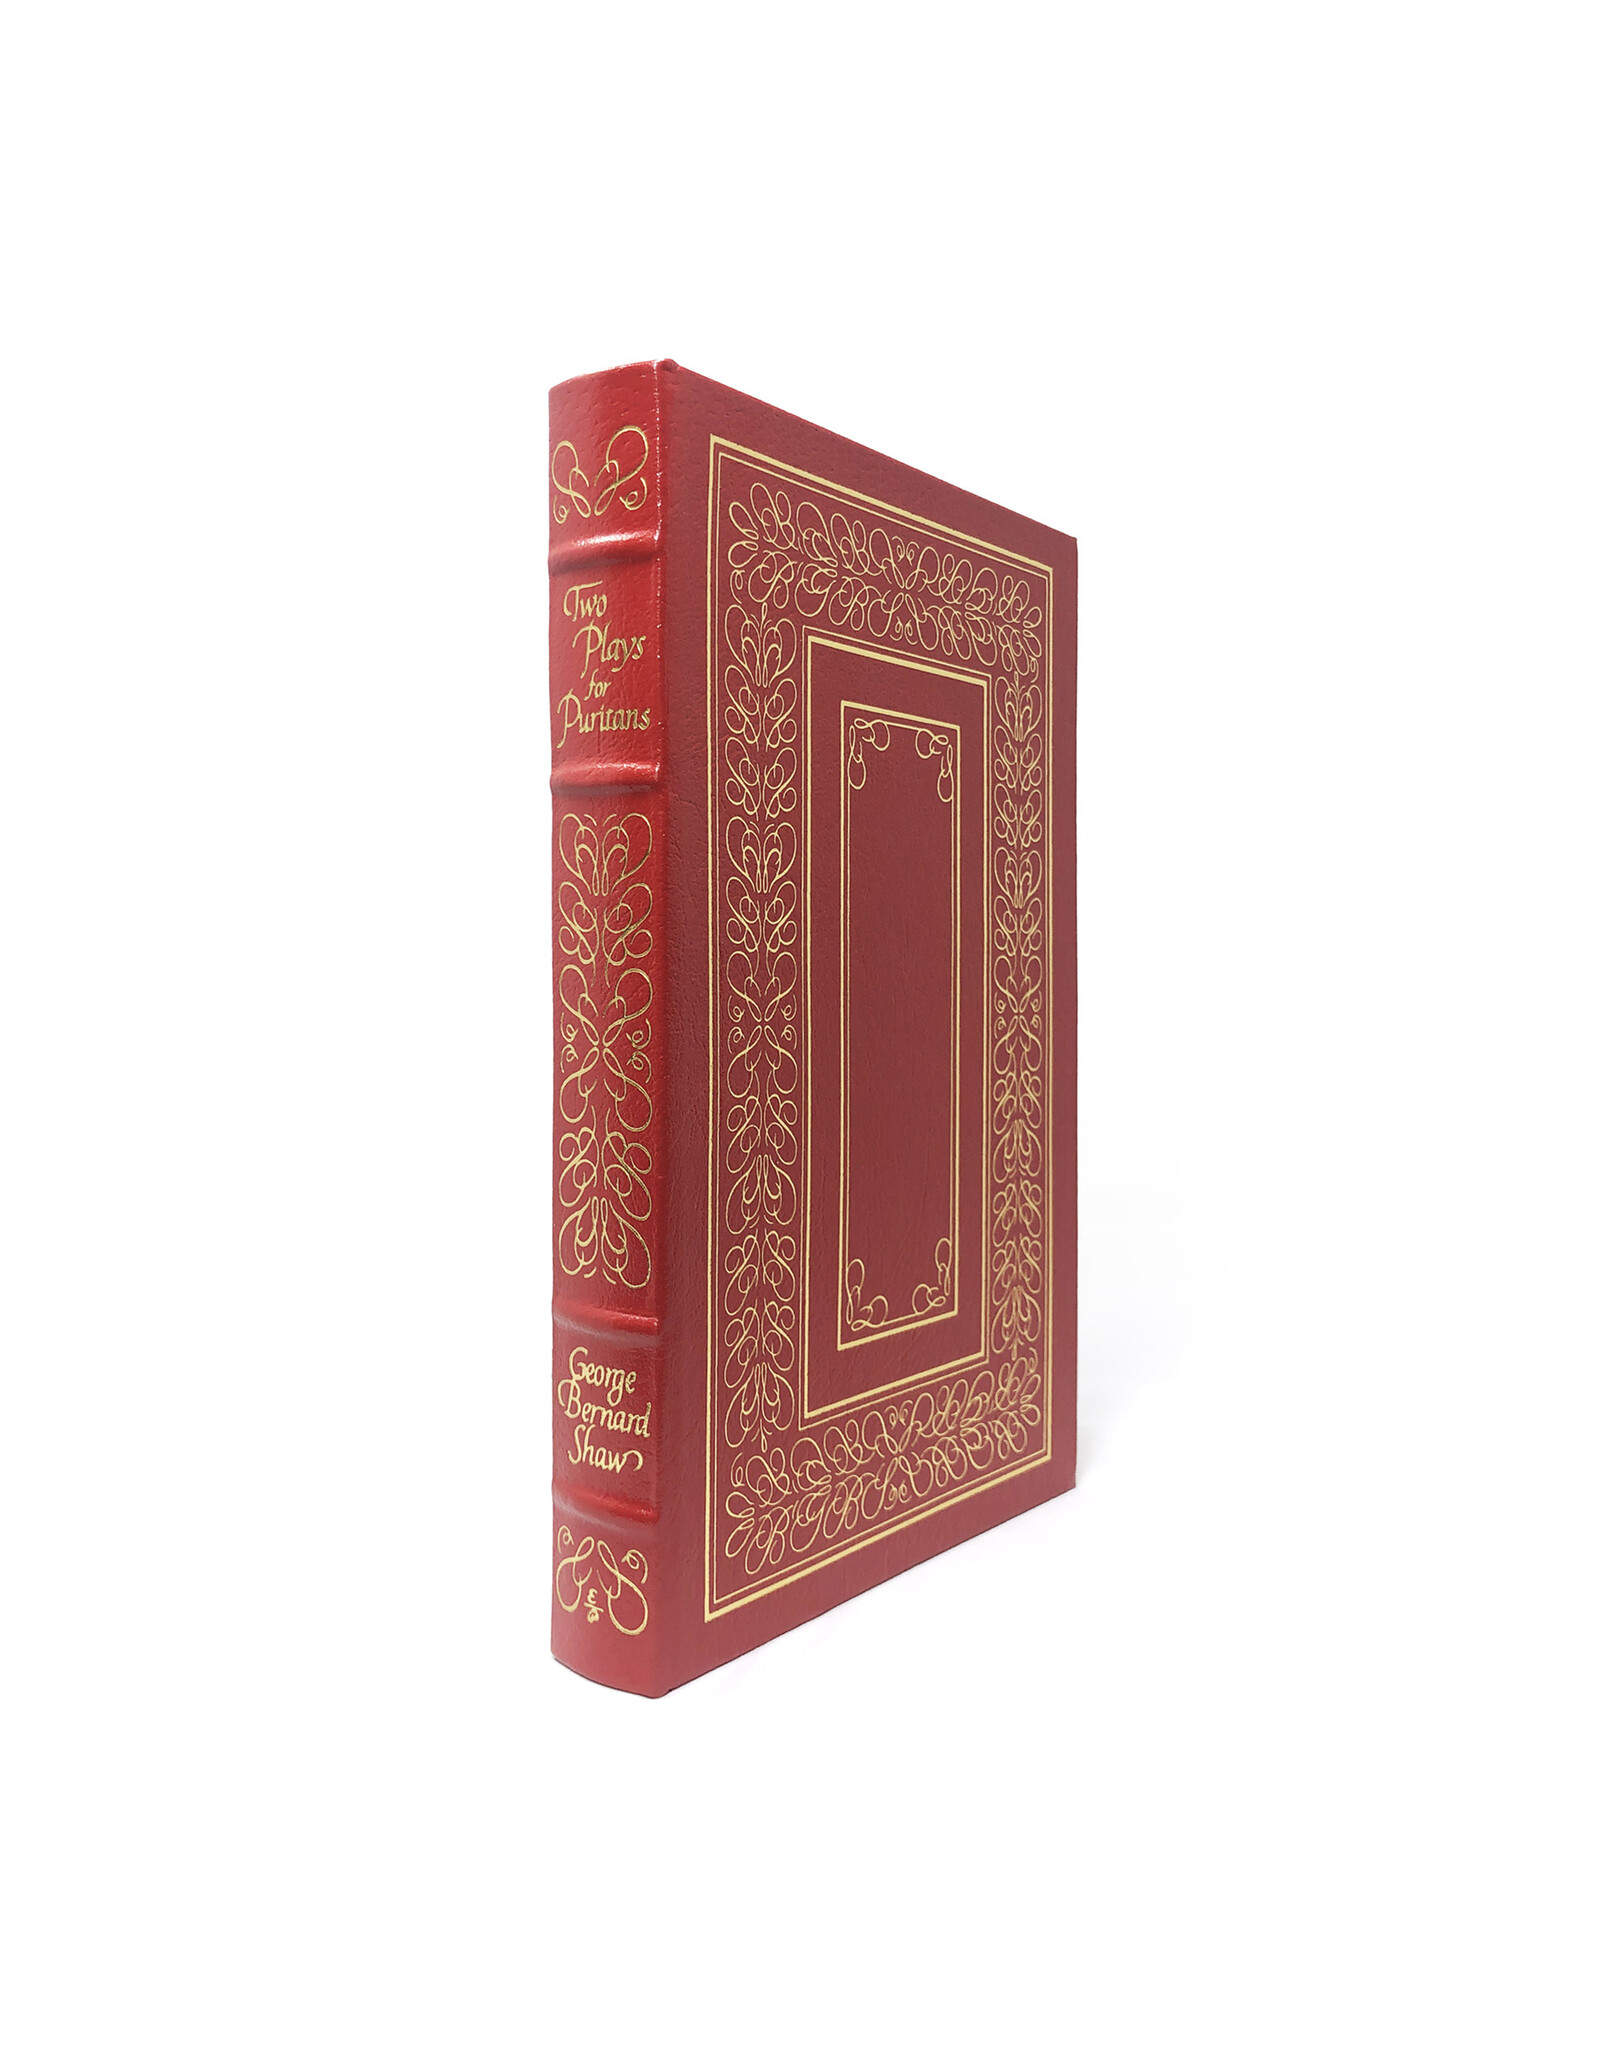 Easton Press Two Plays for Puritans: The Devil's Disciple, Cæsar and Cleopatra 100 Greatest Books Ever Written Genuine Leather Collector's Edition